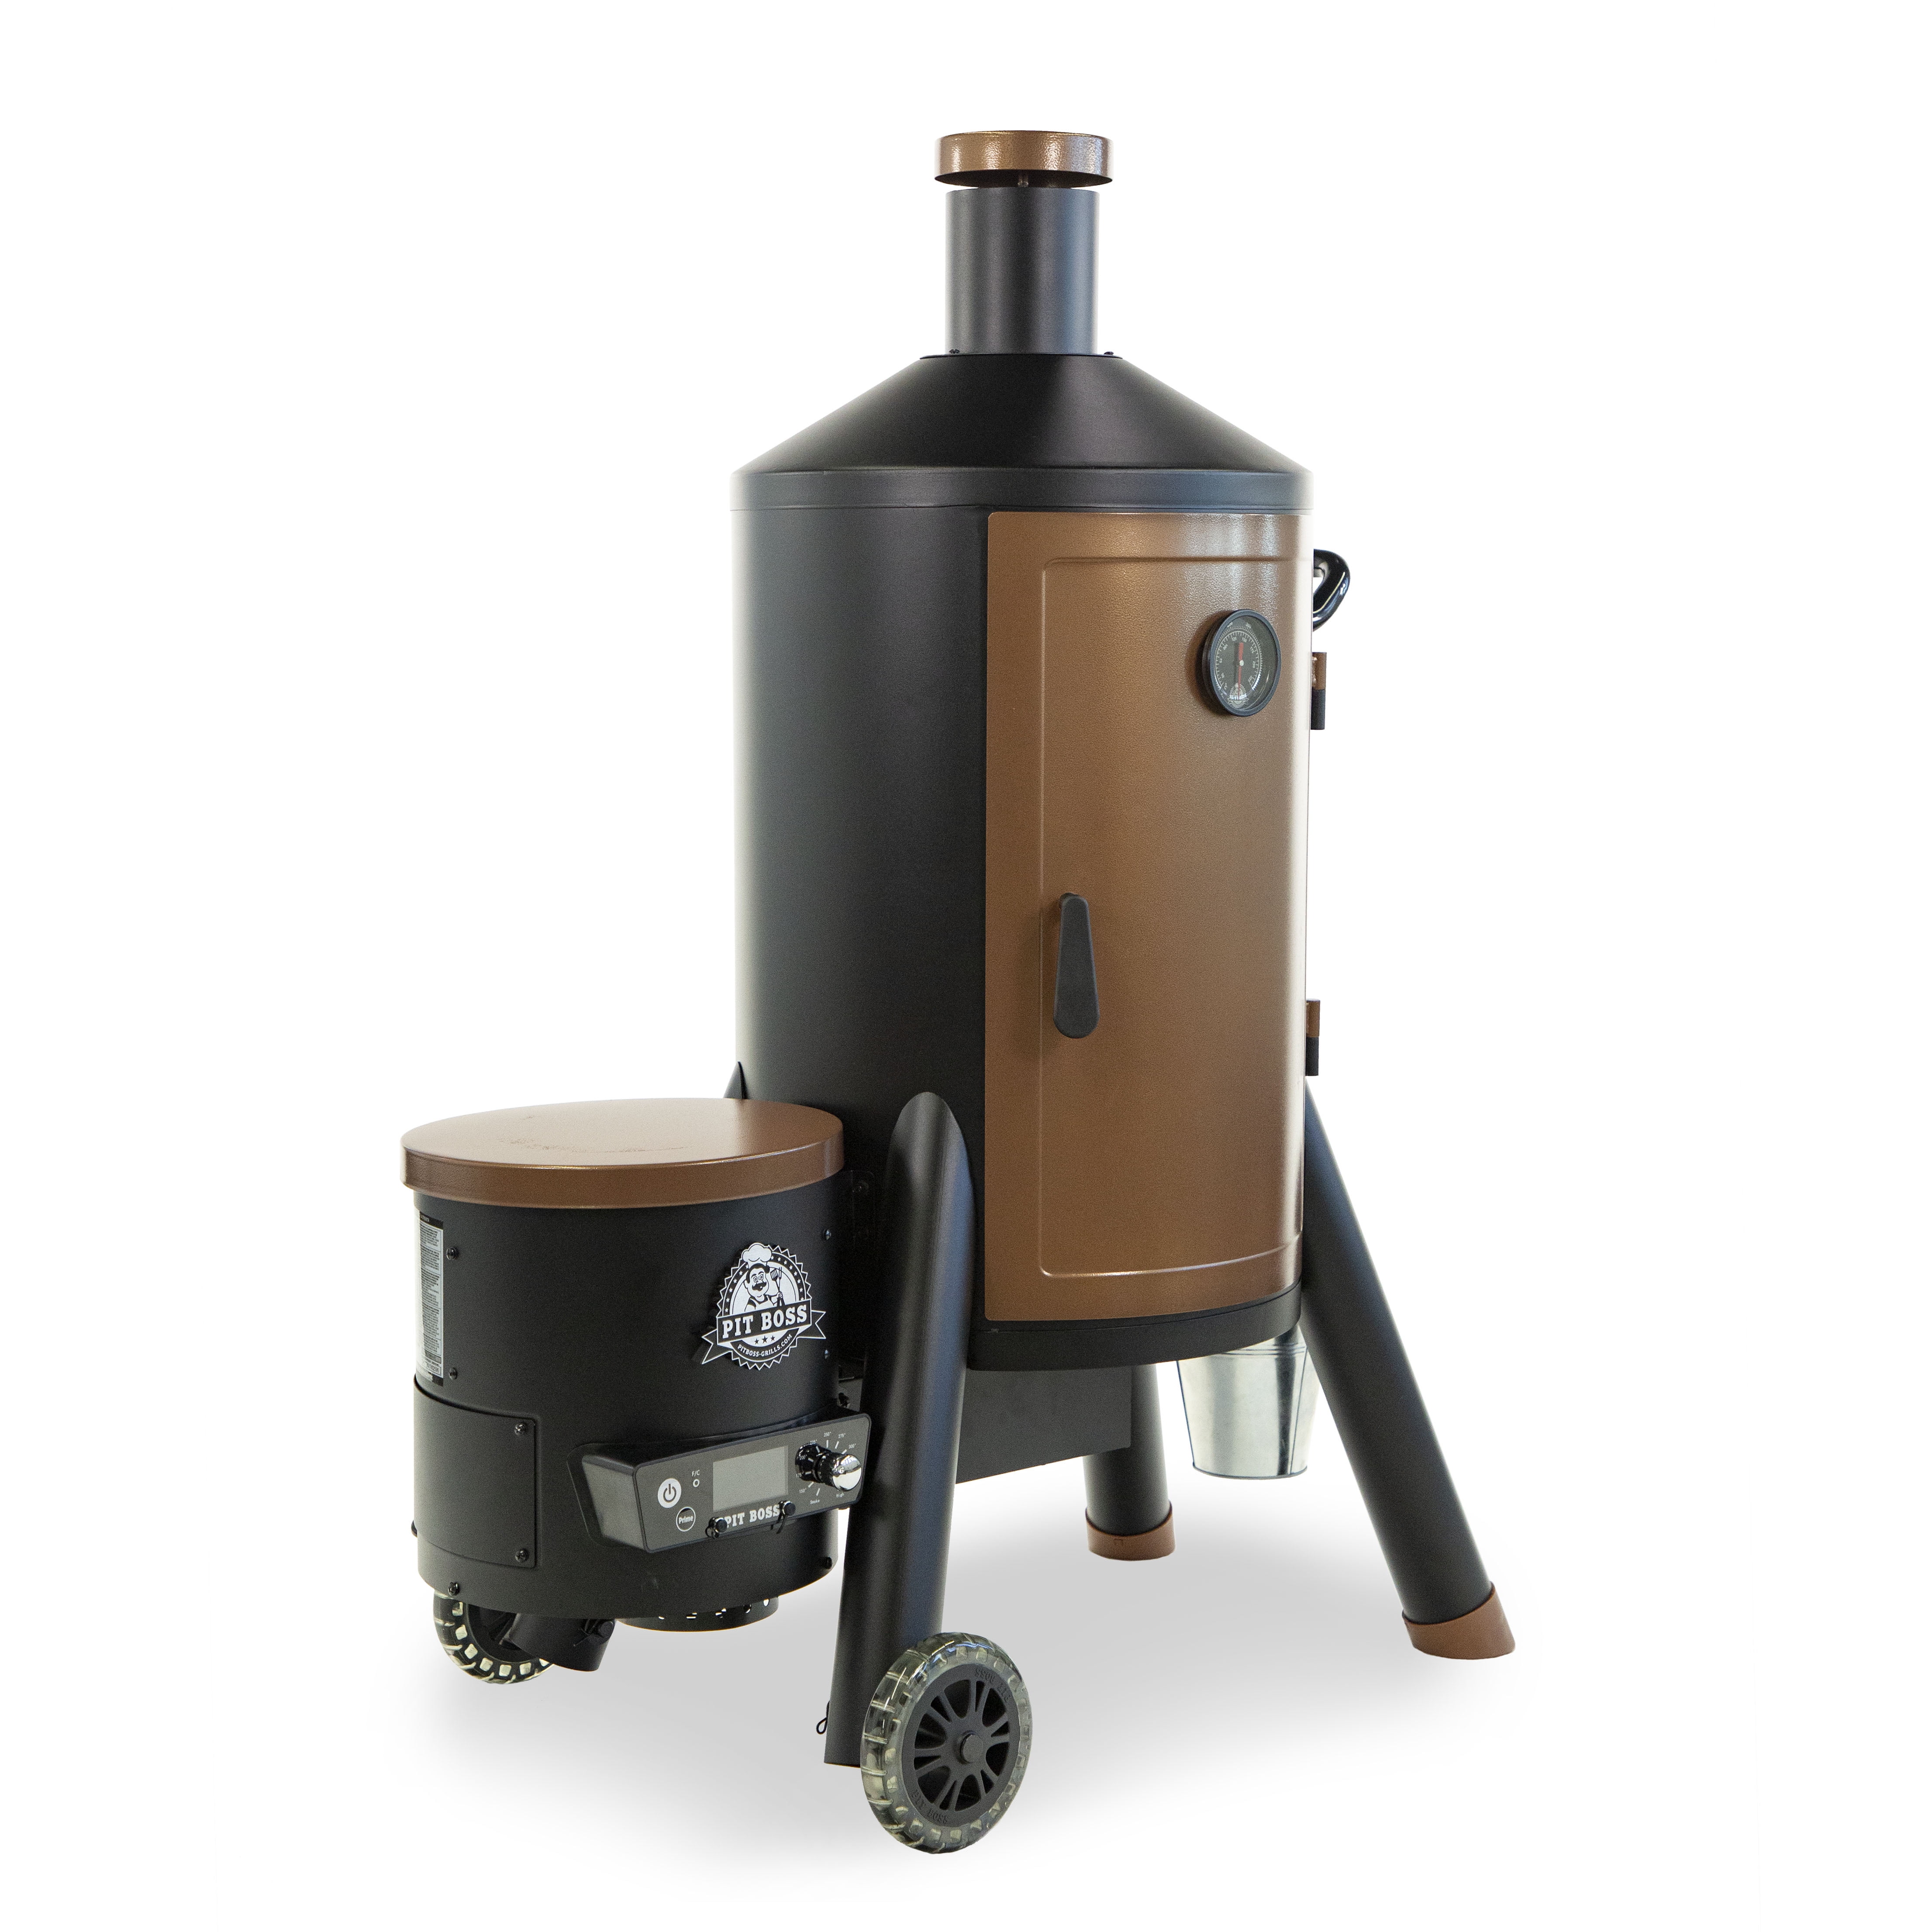 12 Must-Have Pit Boss Smoker Accessories - Drizzle Me Skinny!